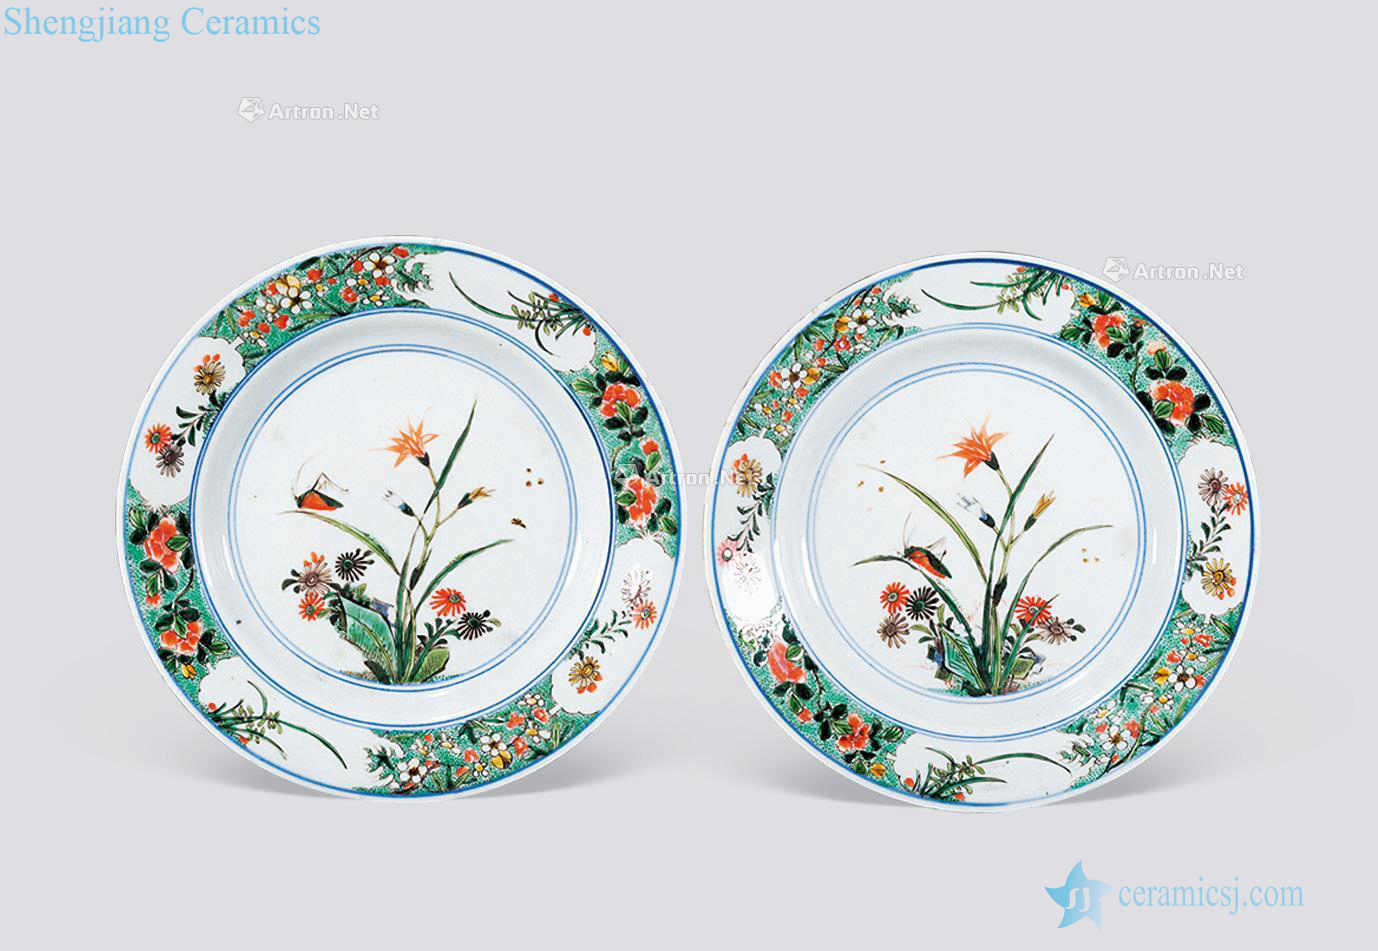 The qing emperor kangxi Colorful flowers and birds plate (a)